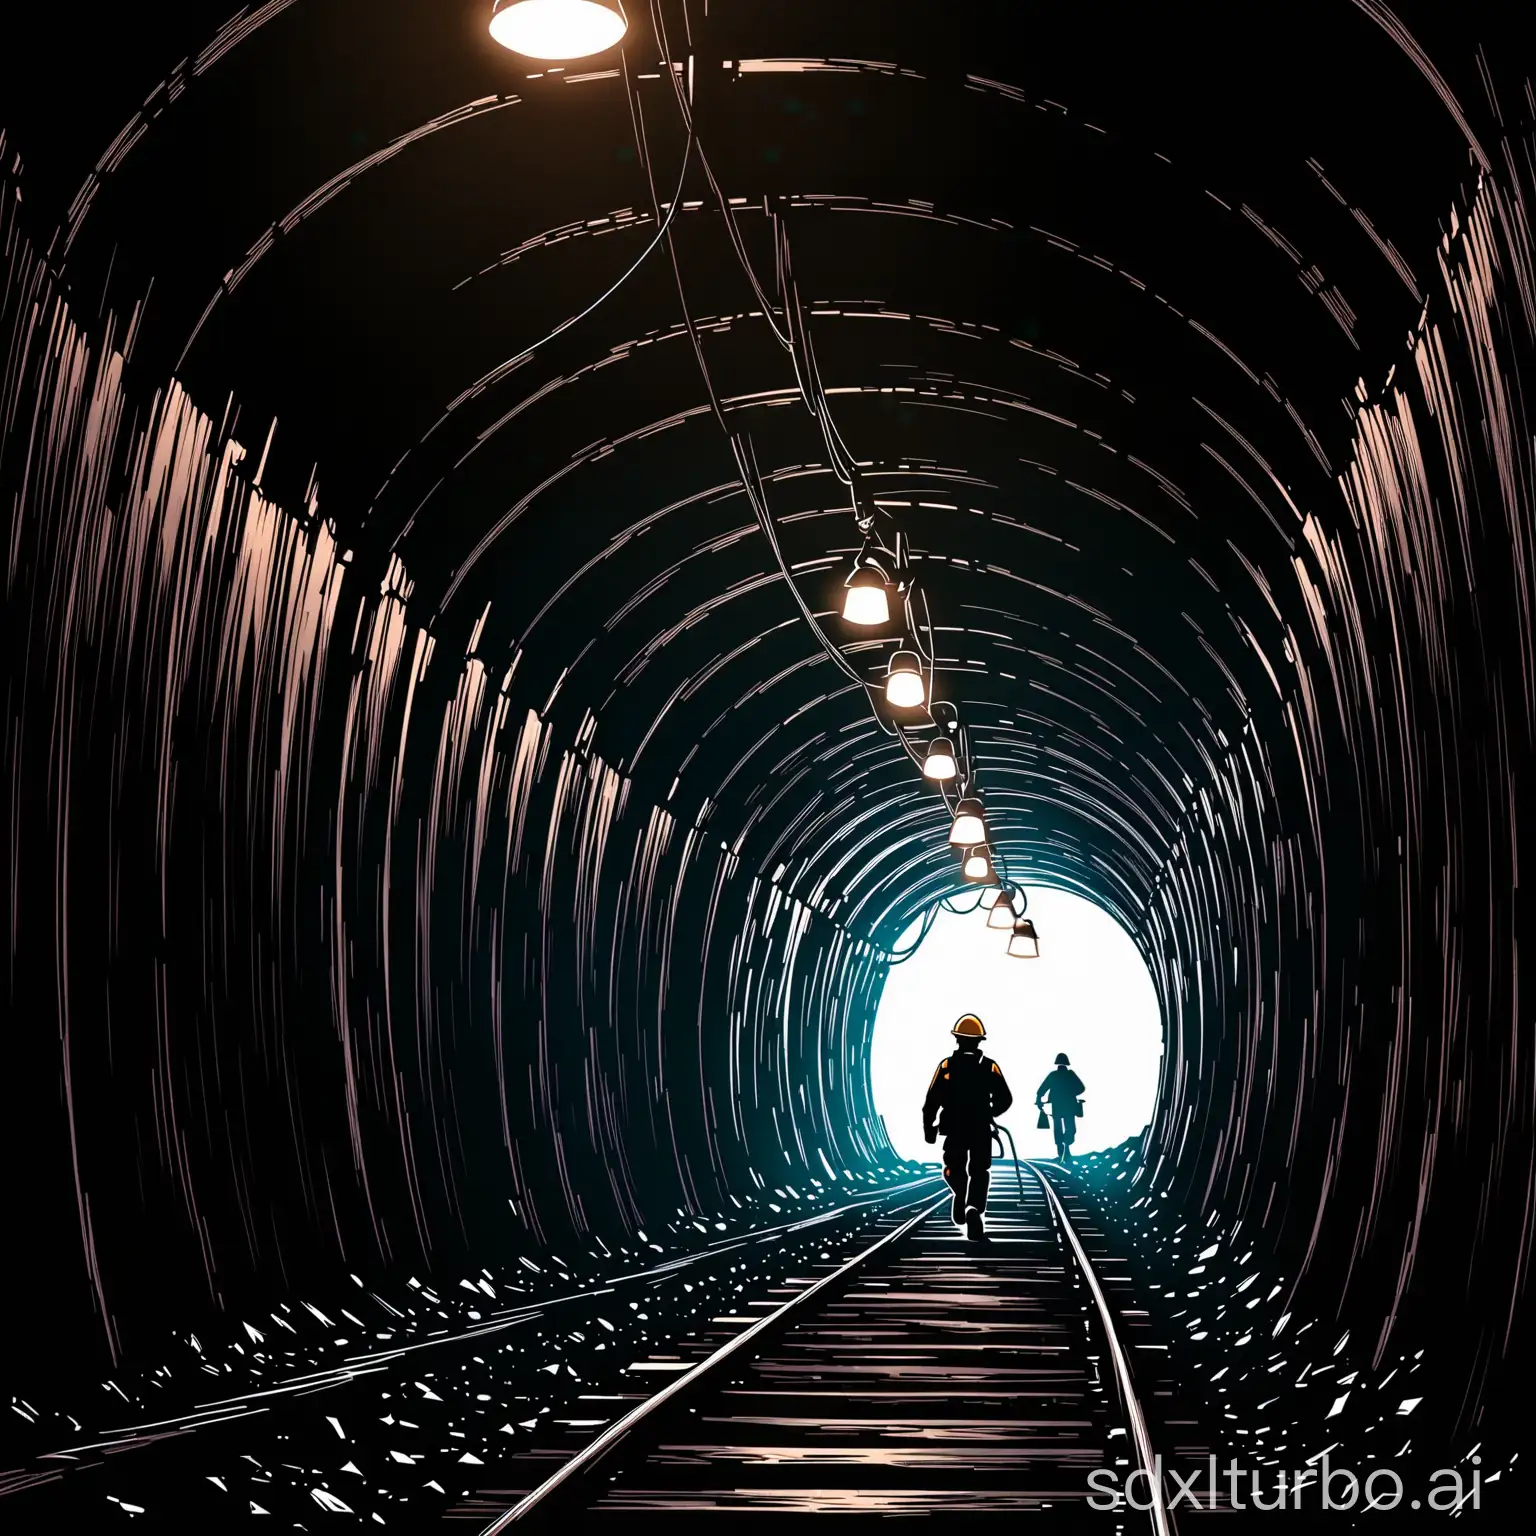 A tunnel, the left wall is a huge 'Safety Production Manual', the right wall is a huge 'Emergency Manual', there are hanging lamps on the top, there are many cables, coal blocks scattered on the ground, and the silhouette of a miner is walking along the tunnel towards the outside.